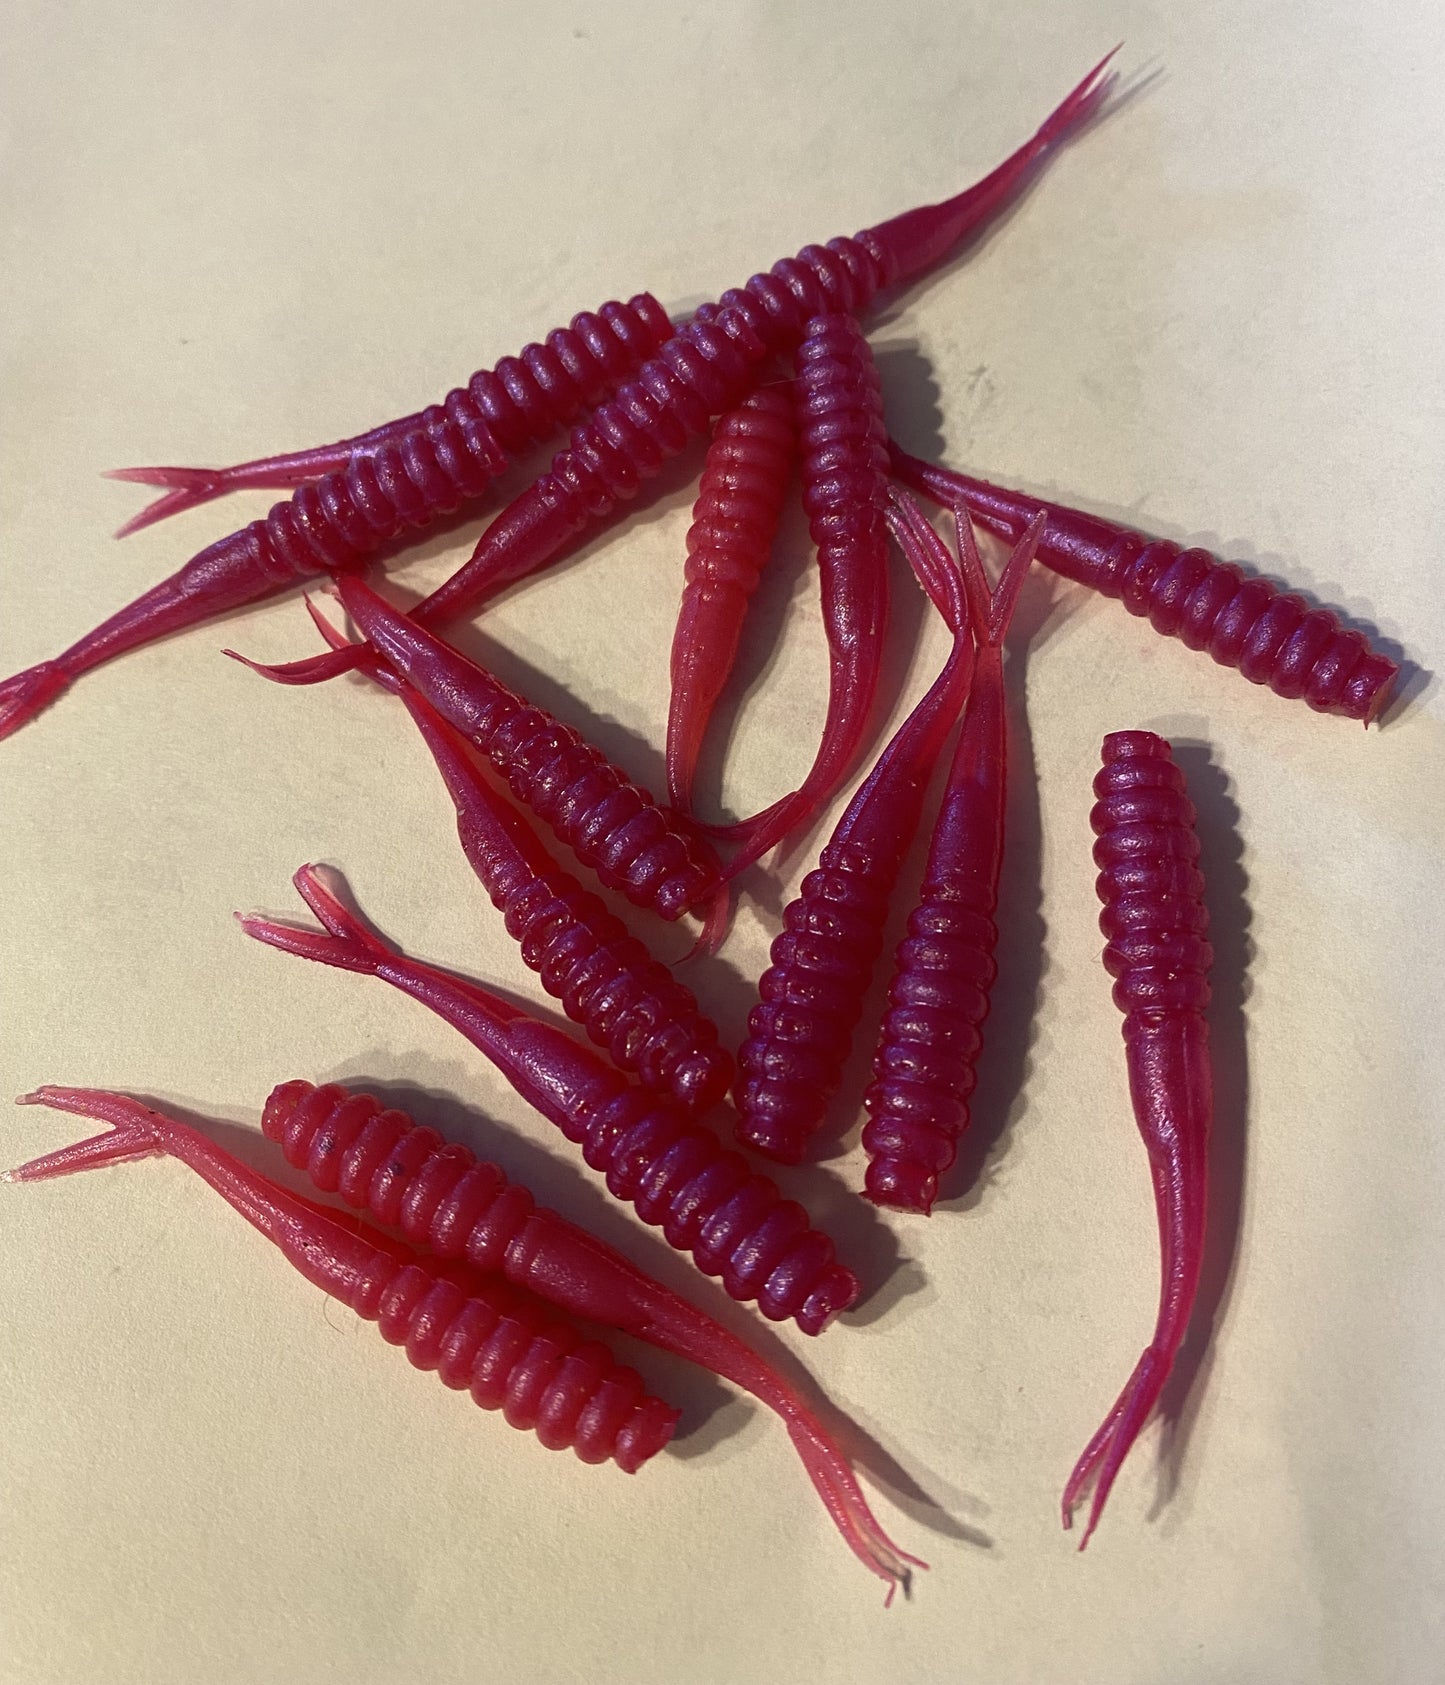 2.5 crappie flukes soft plastic baits – M & C's Handcrafted Jigs